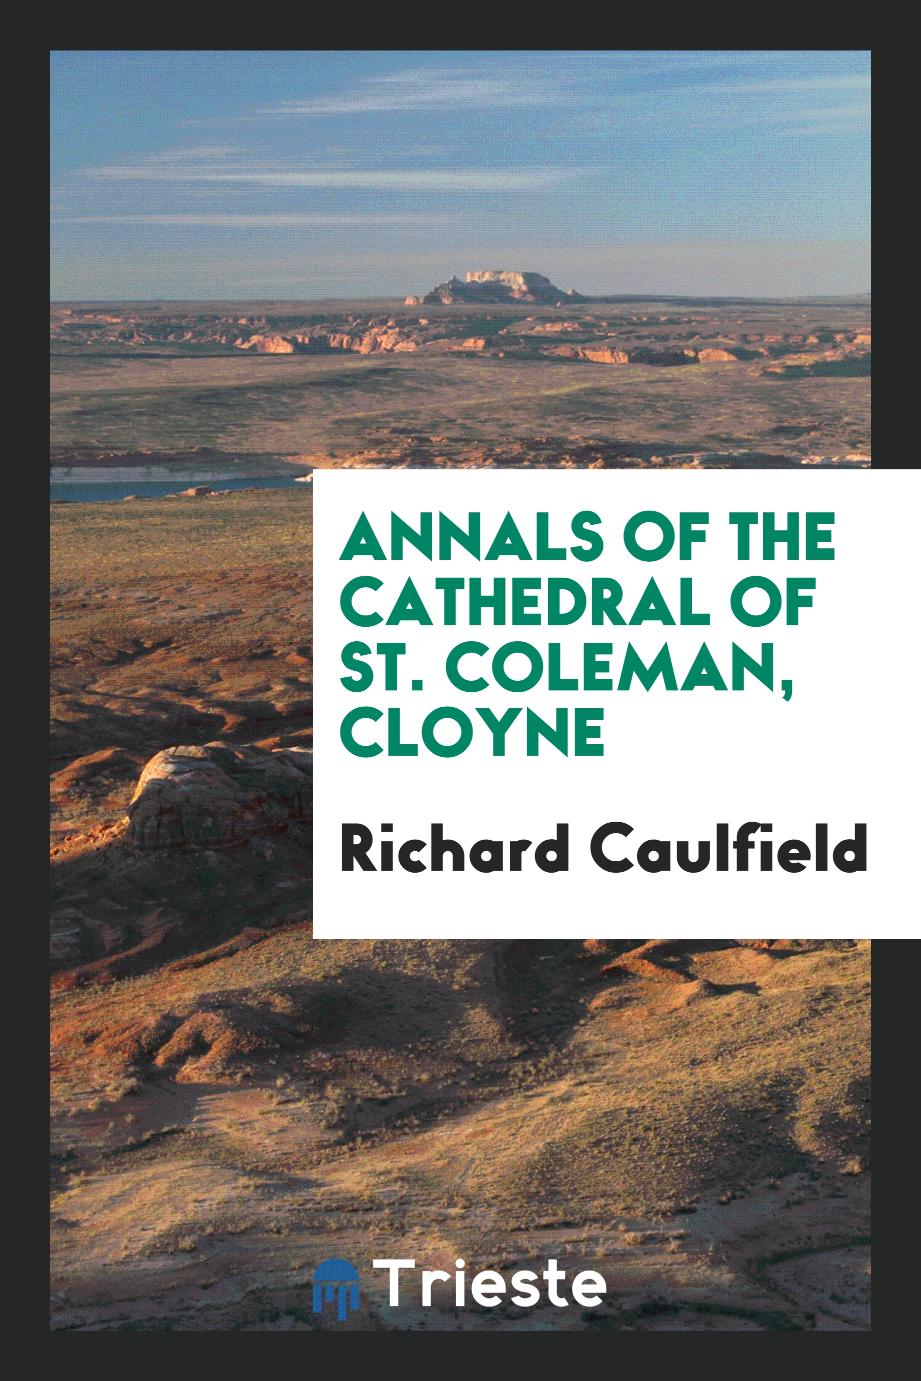 Annals of the Cathedral of St. Coleman, Cloyne